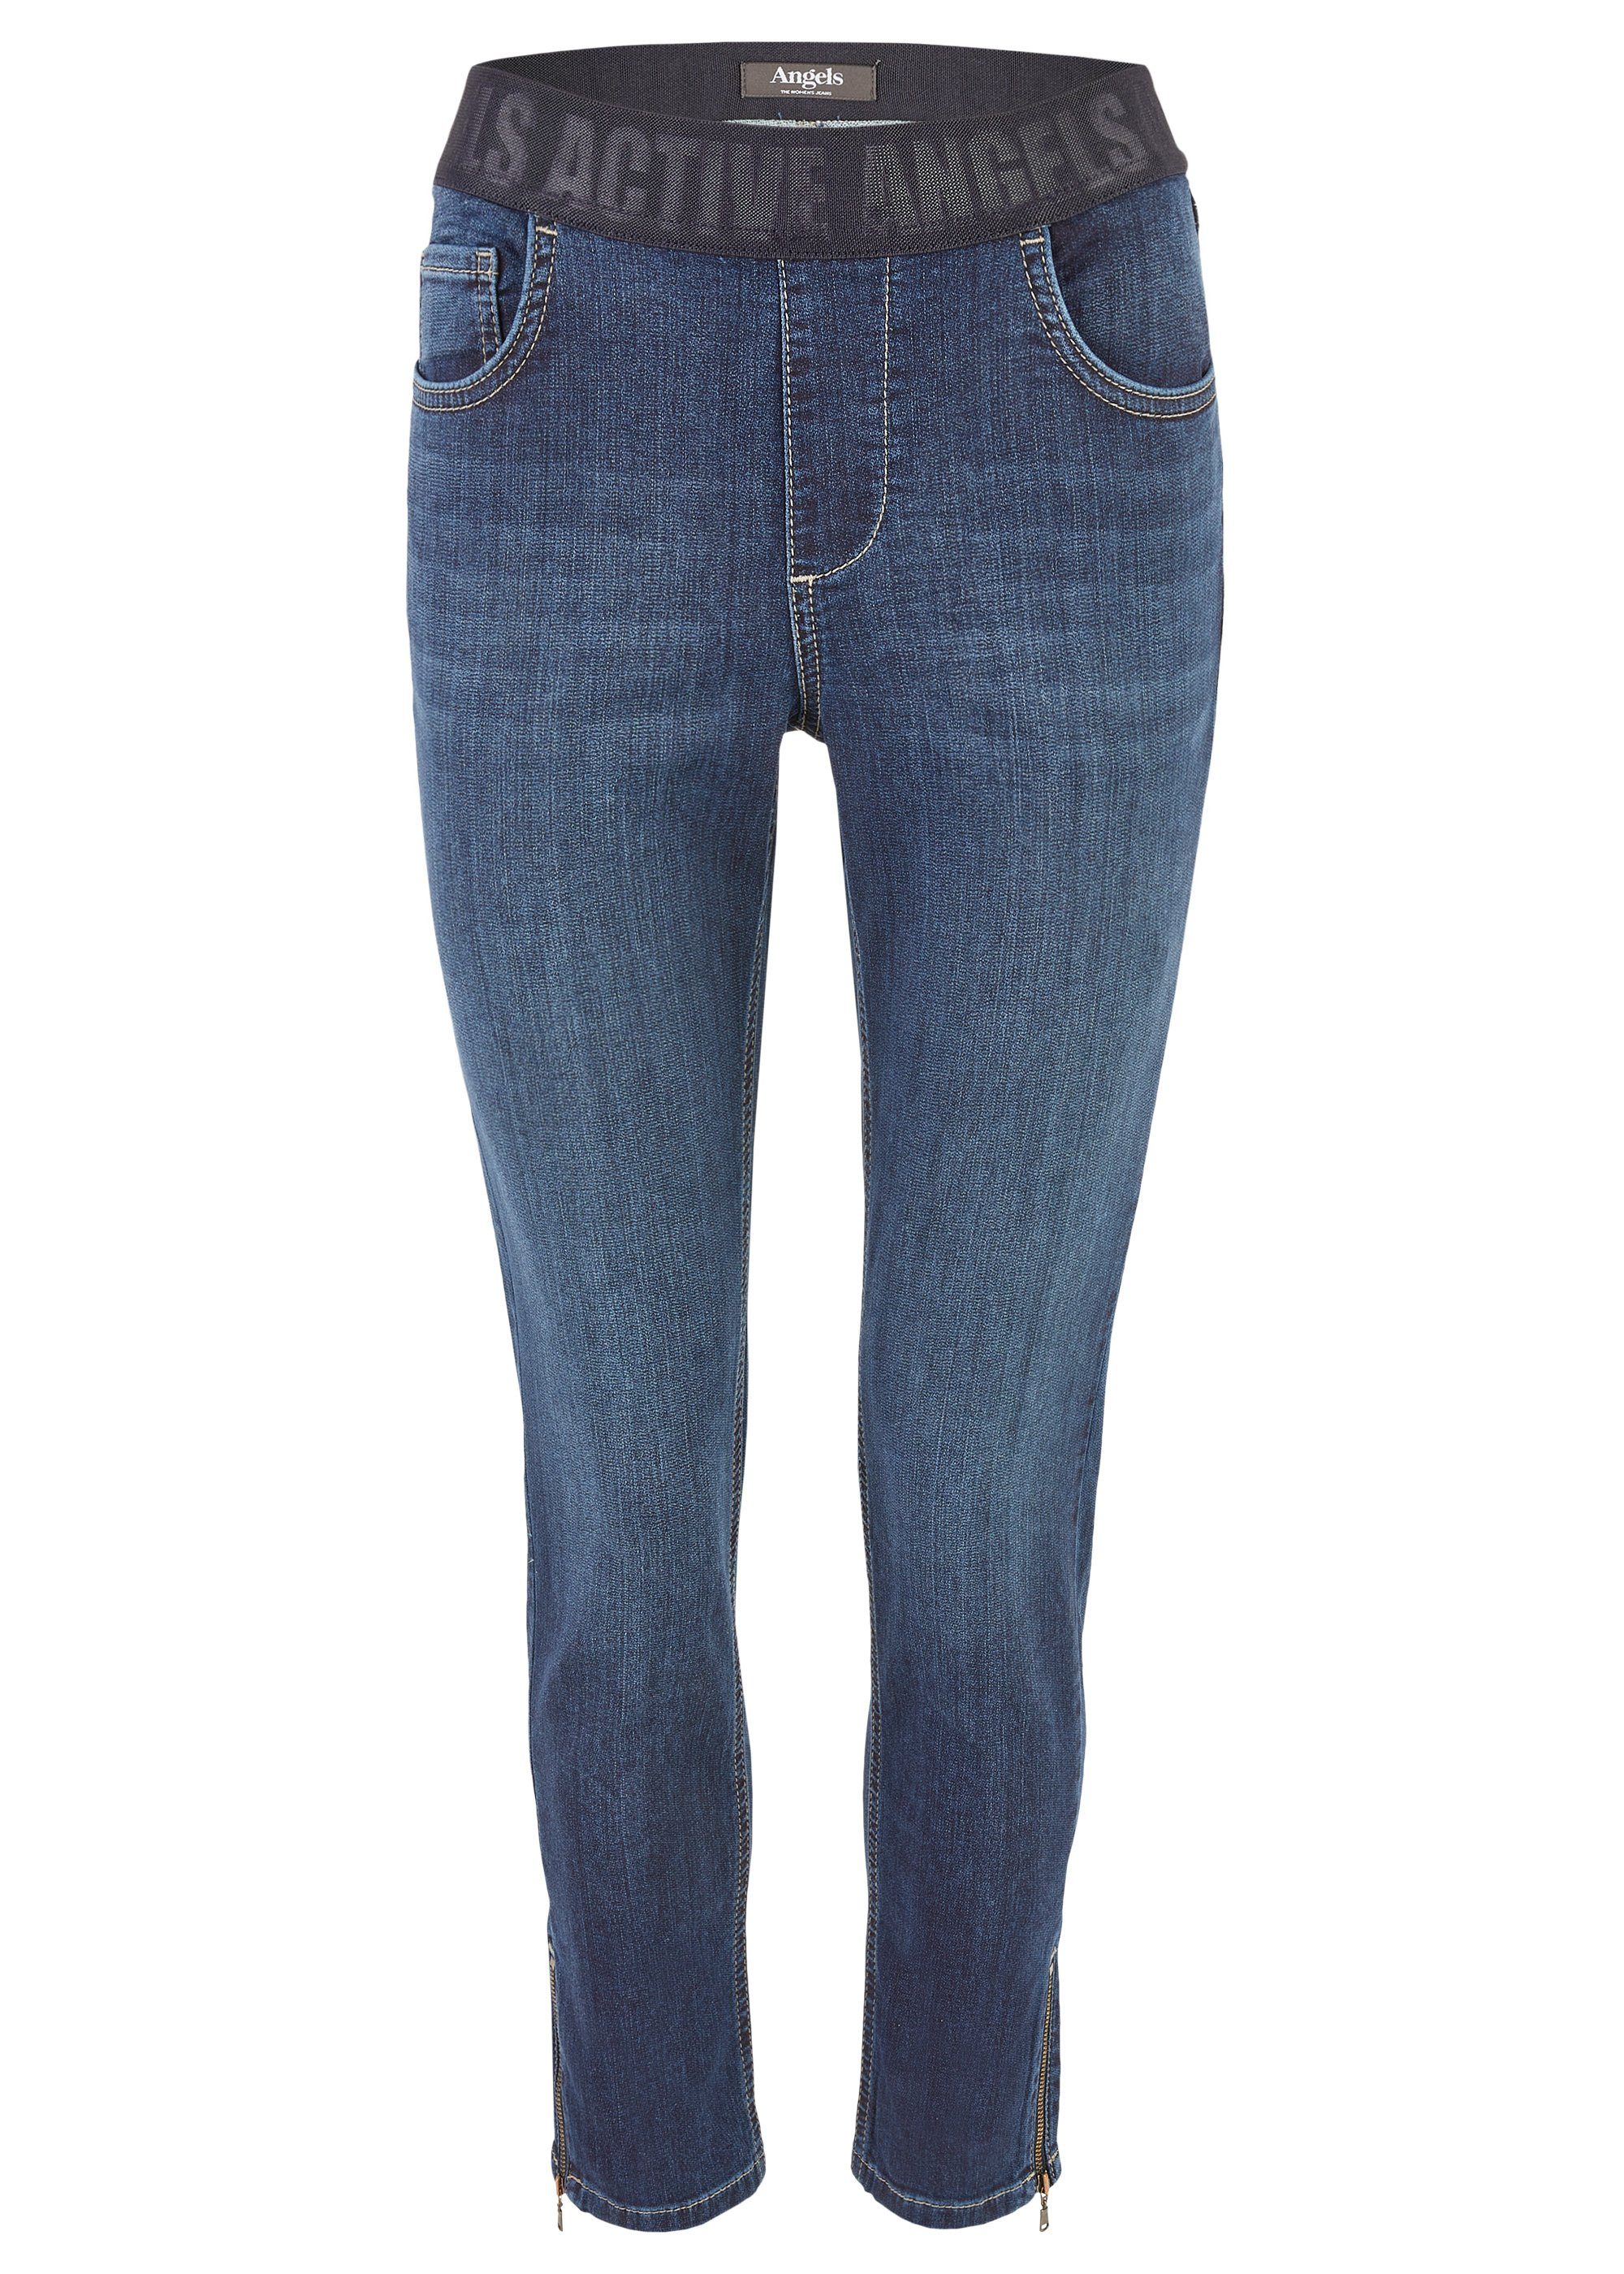 JEANS blue 585 ZIP Stretch-Jeans ANGELS 120500.305 STRETCH SHAPE SKINNY ANGELS used - night